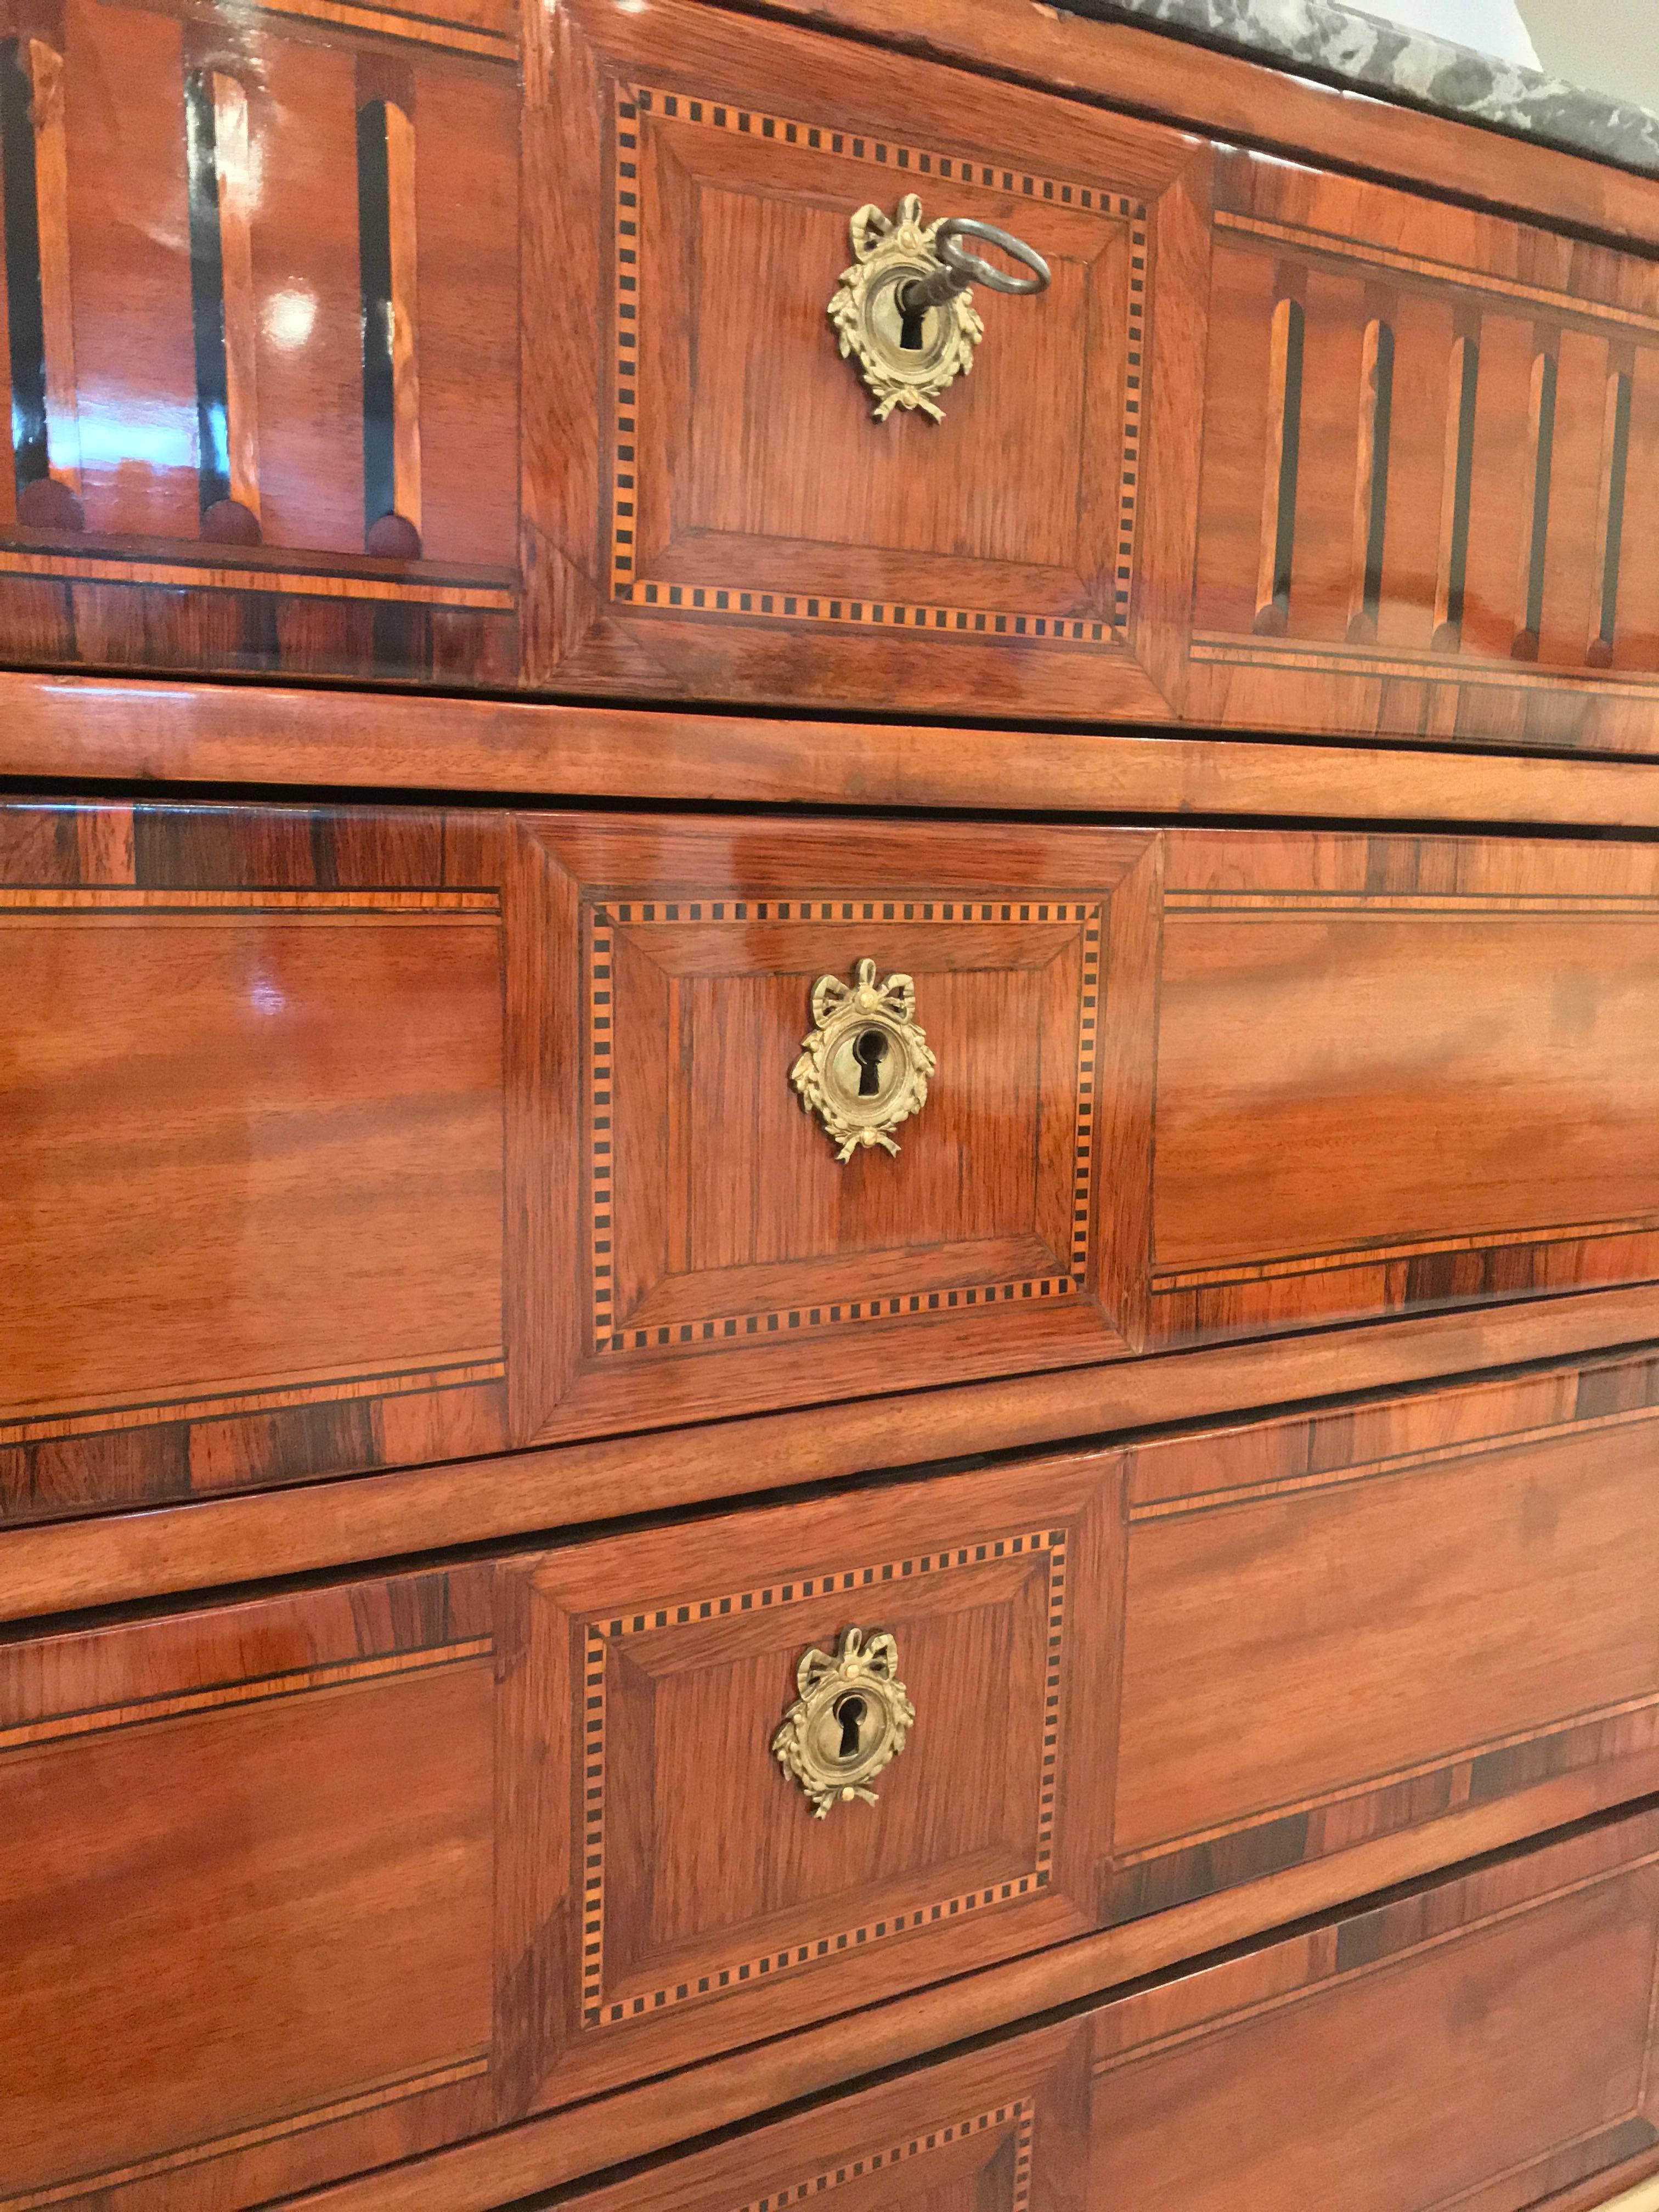 Exquisite 18th century Louis XVI chest of drawers, France 1780, beautiful kingwood, mahogany and elm wood veneer and marquetry. Almost square body on four small pointed feet. The front is divided by four drawers. Original grey marble top. Good